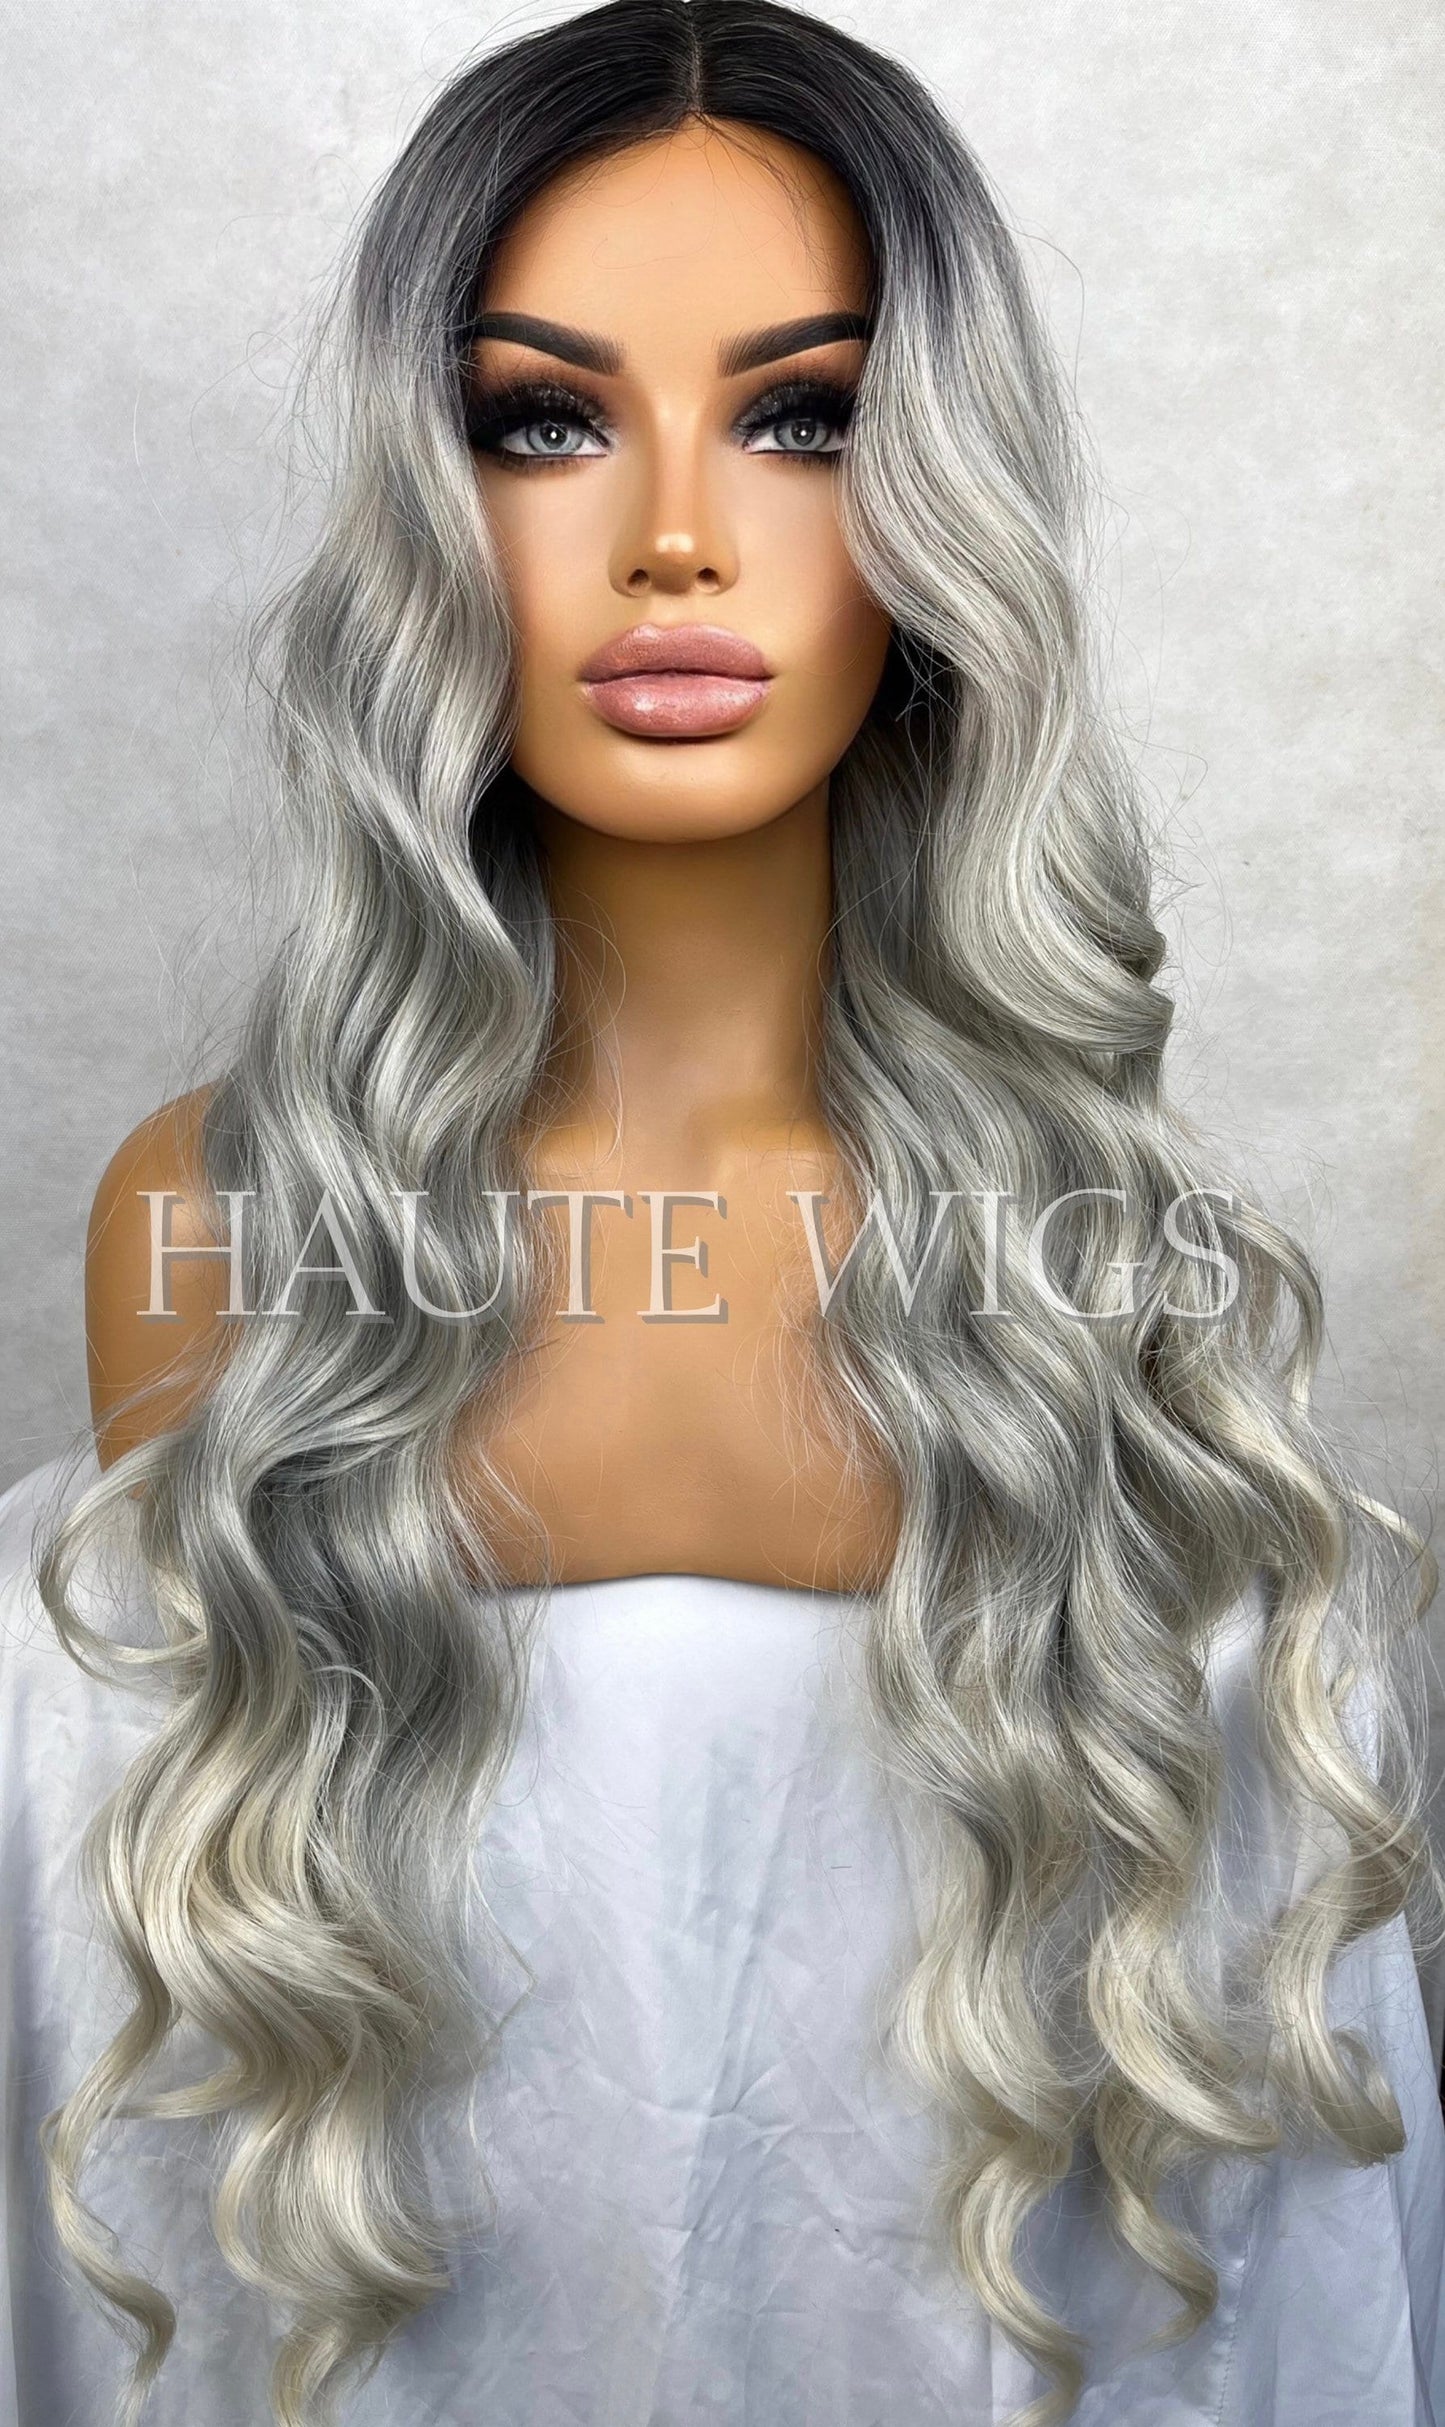 WAVY 38 Inches Long Luxury No Lace Front Human Hair Blends Wig Womens center Parting Wigs Platinum Silver Blonde Ombre Hair Gift For Her